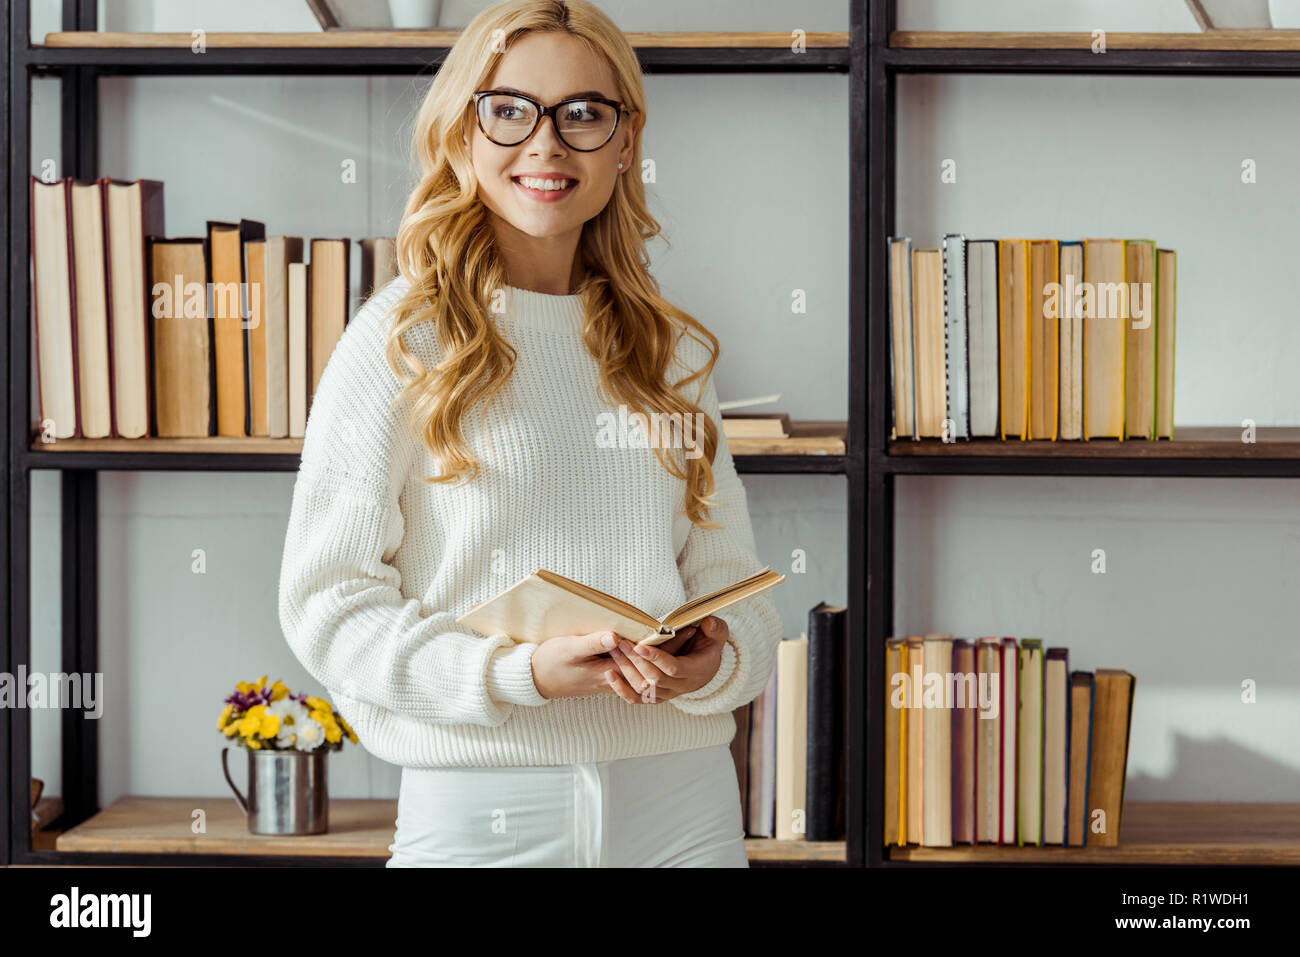 close up of cheerful woman in glasses with book standing near rack Stock Photo